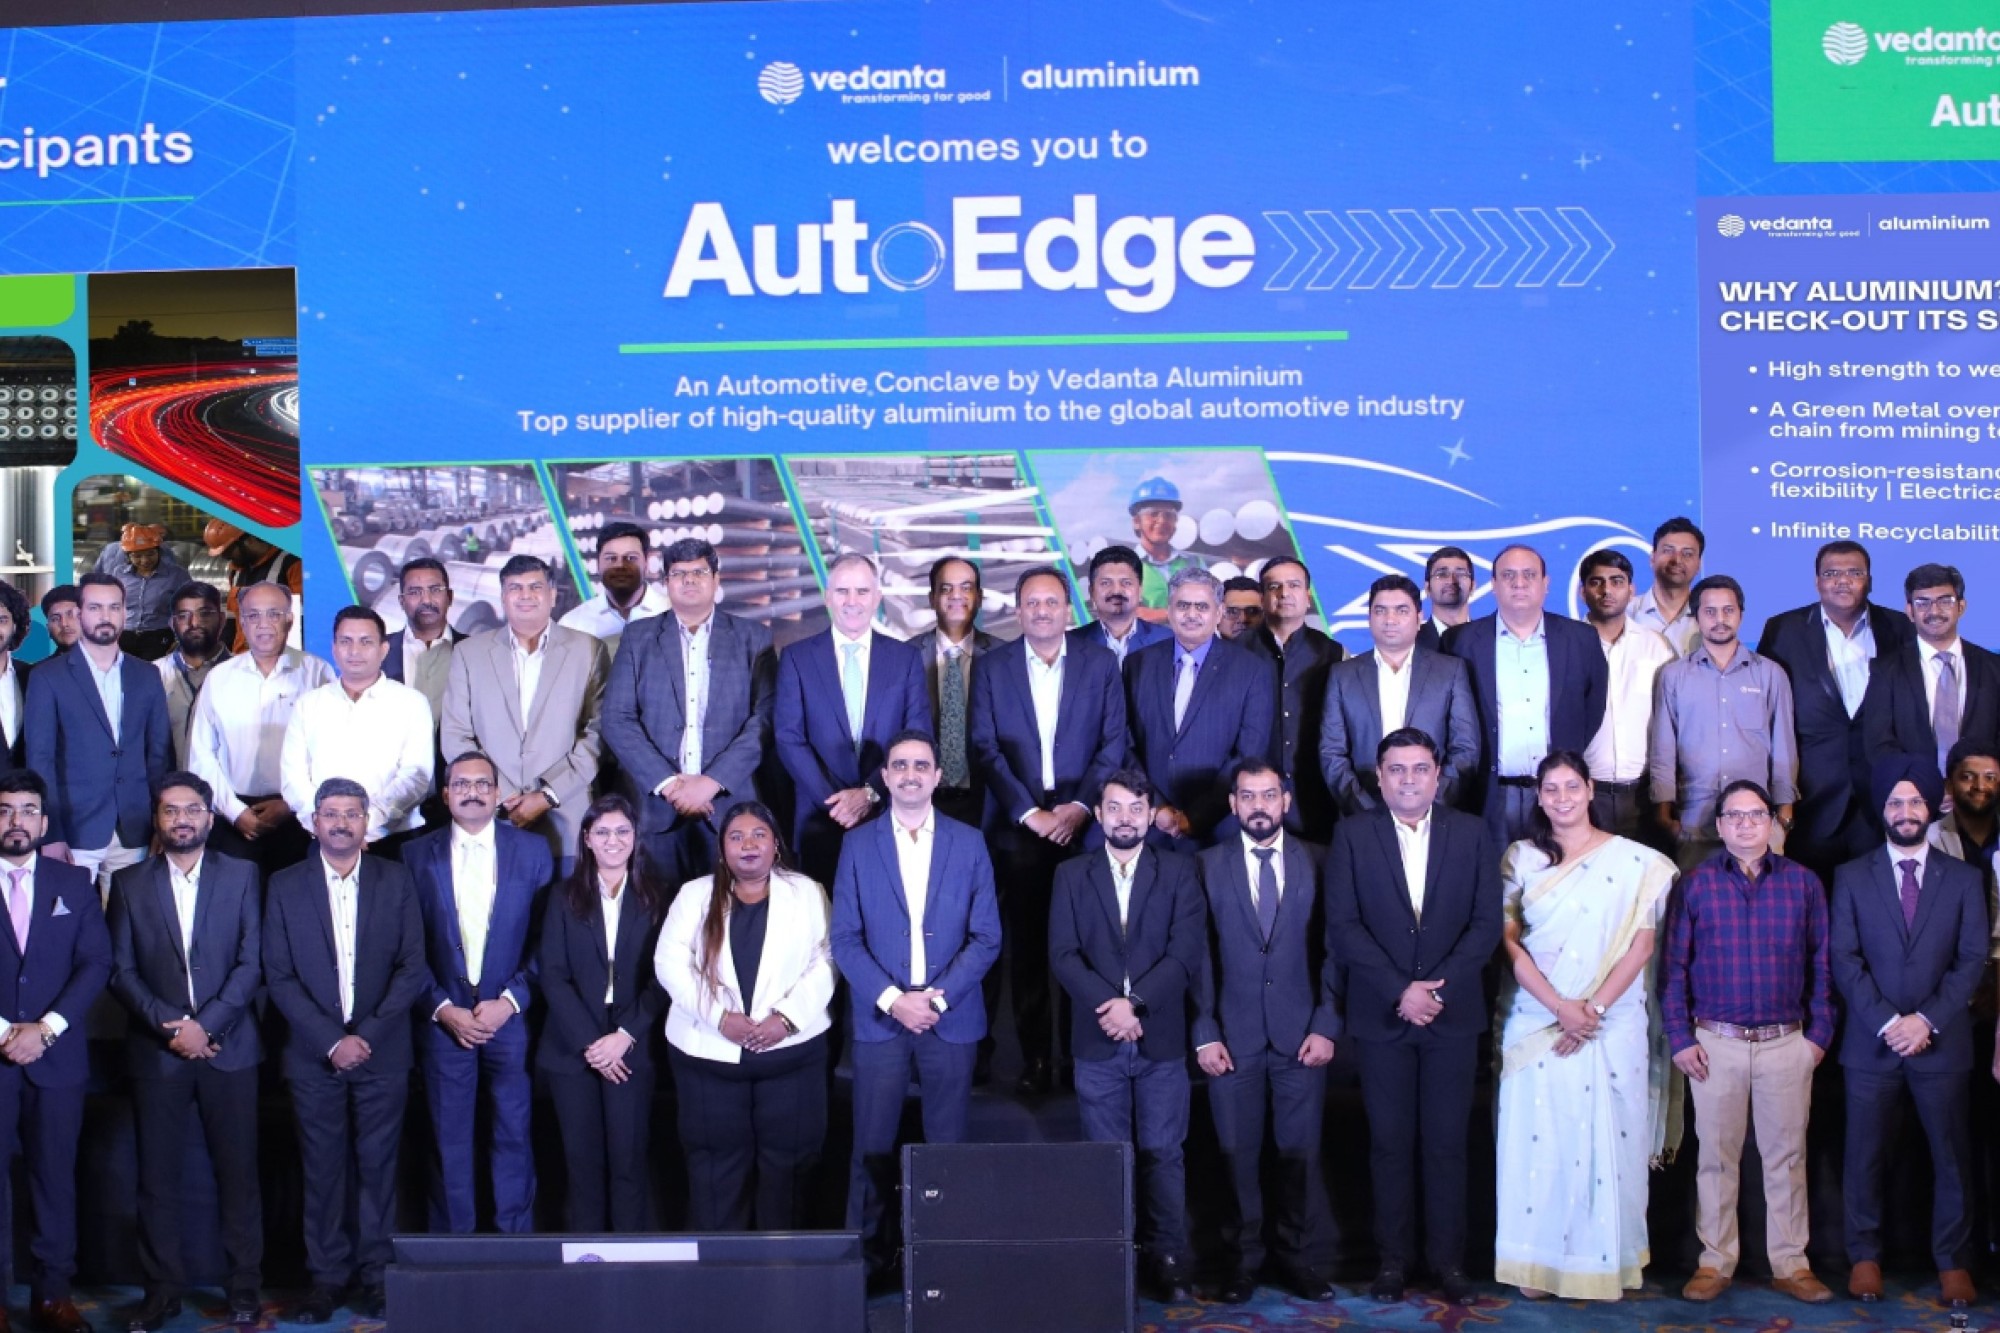 Vedanta Aluminium sets high standards in the automotive industry and sustainability